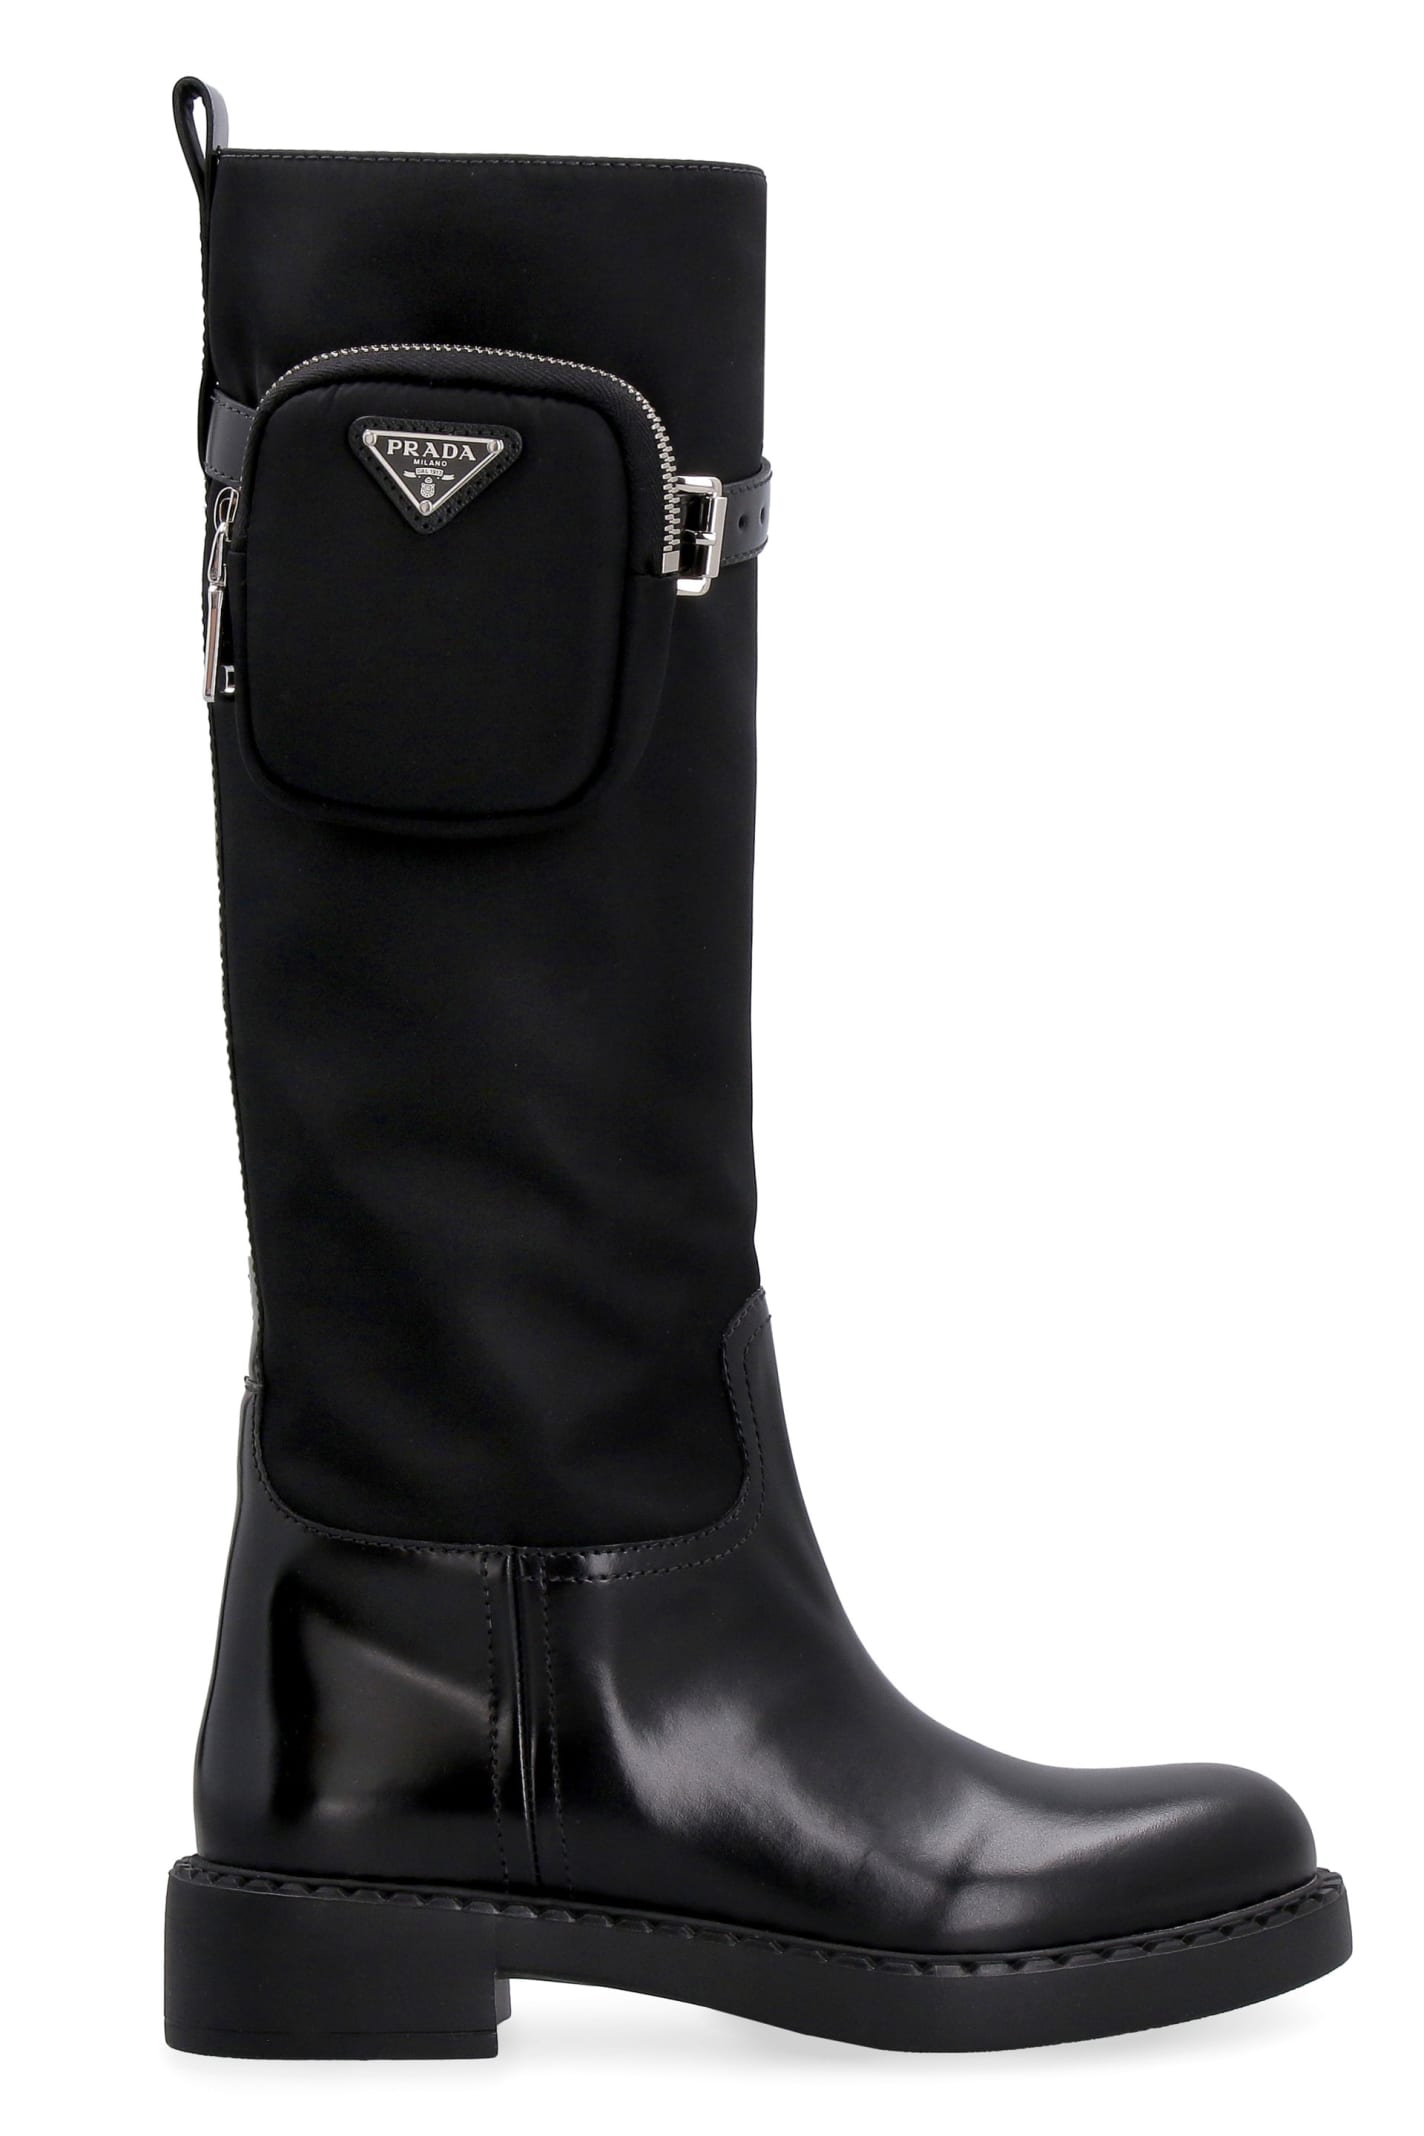 Prada Leather And Re-nylon Boots